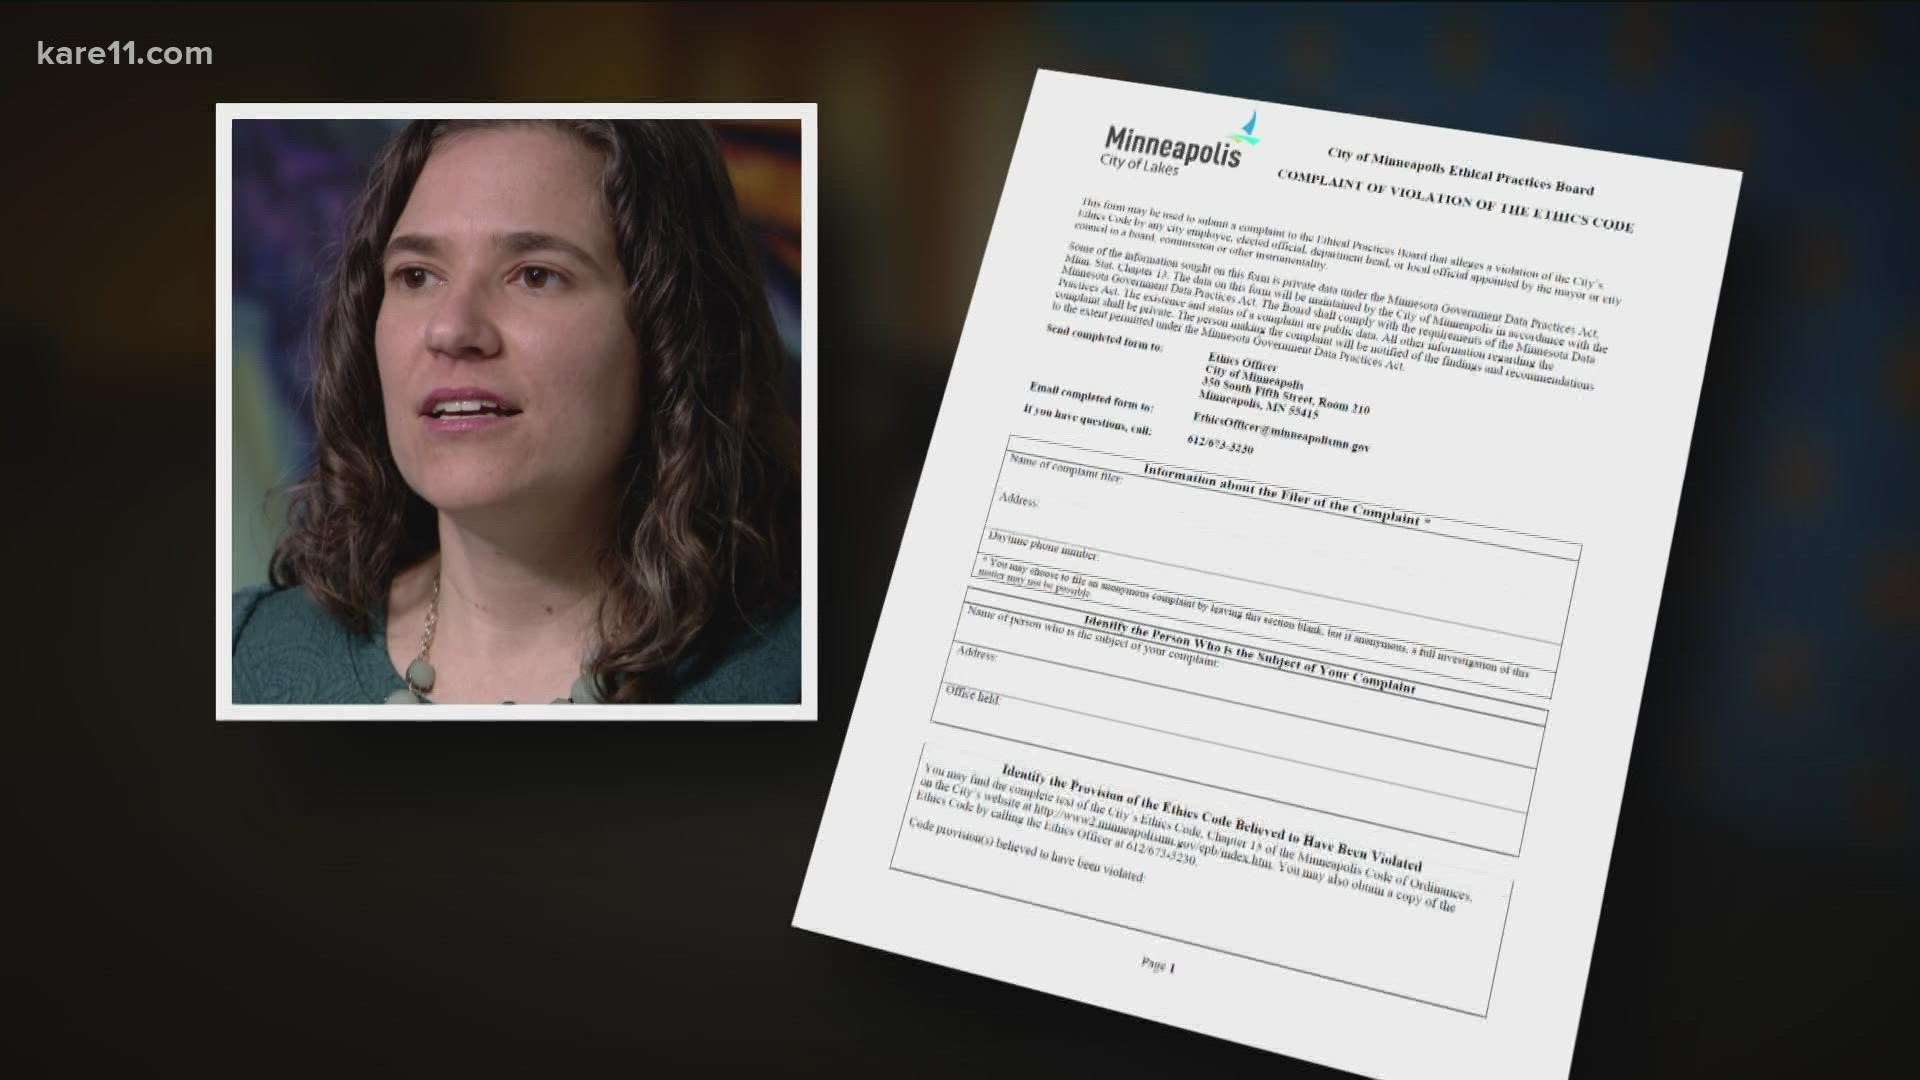 Minneapolis City Council President Lisa Bender filed a complaint saying MPD Chief Medaria Arradondo violated city code during his press conference on Wednesday.